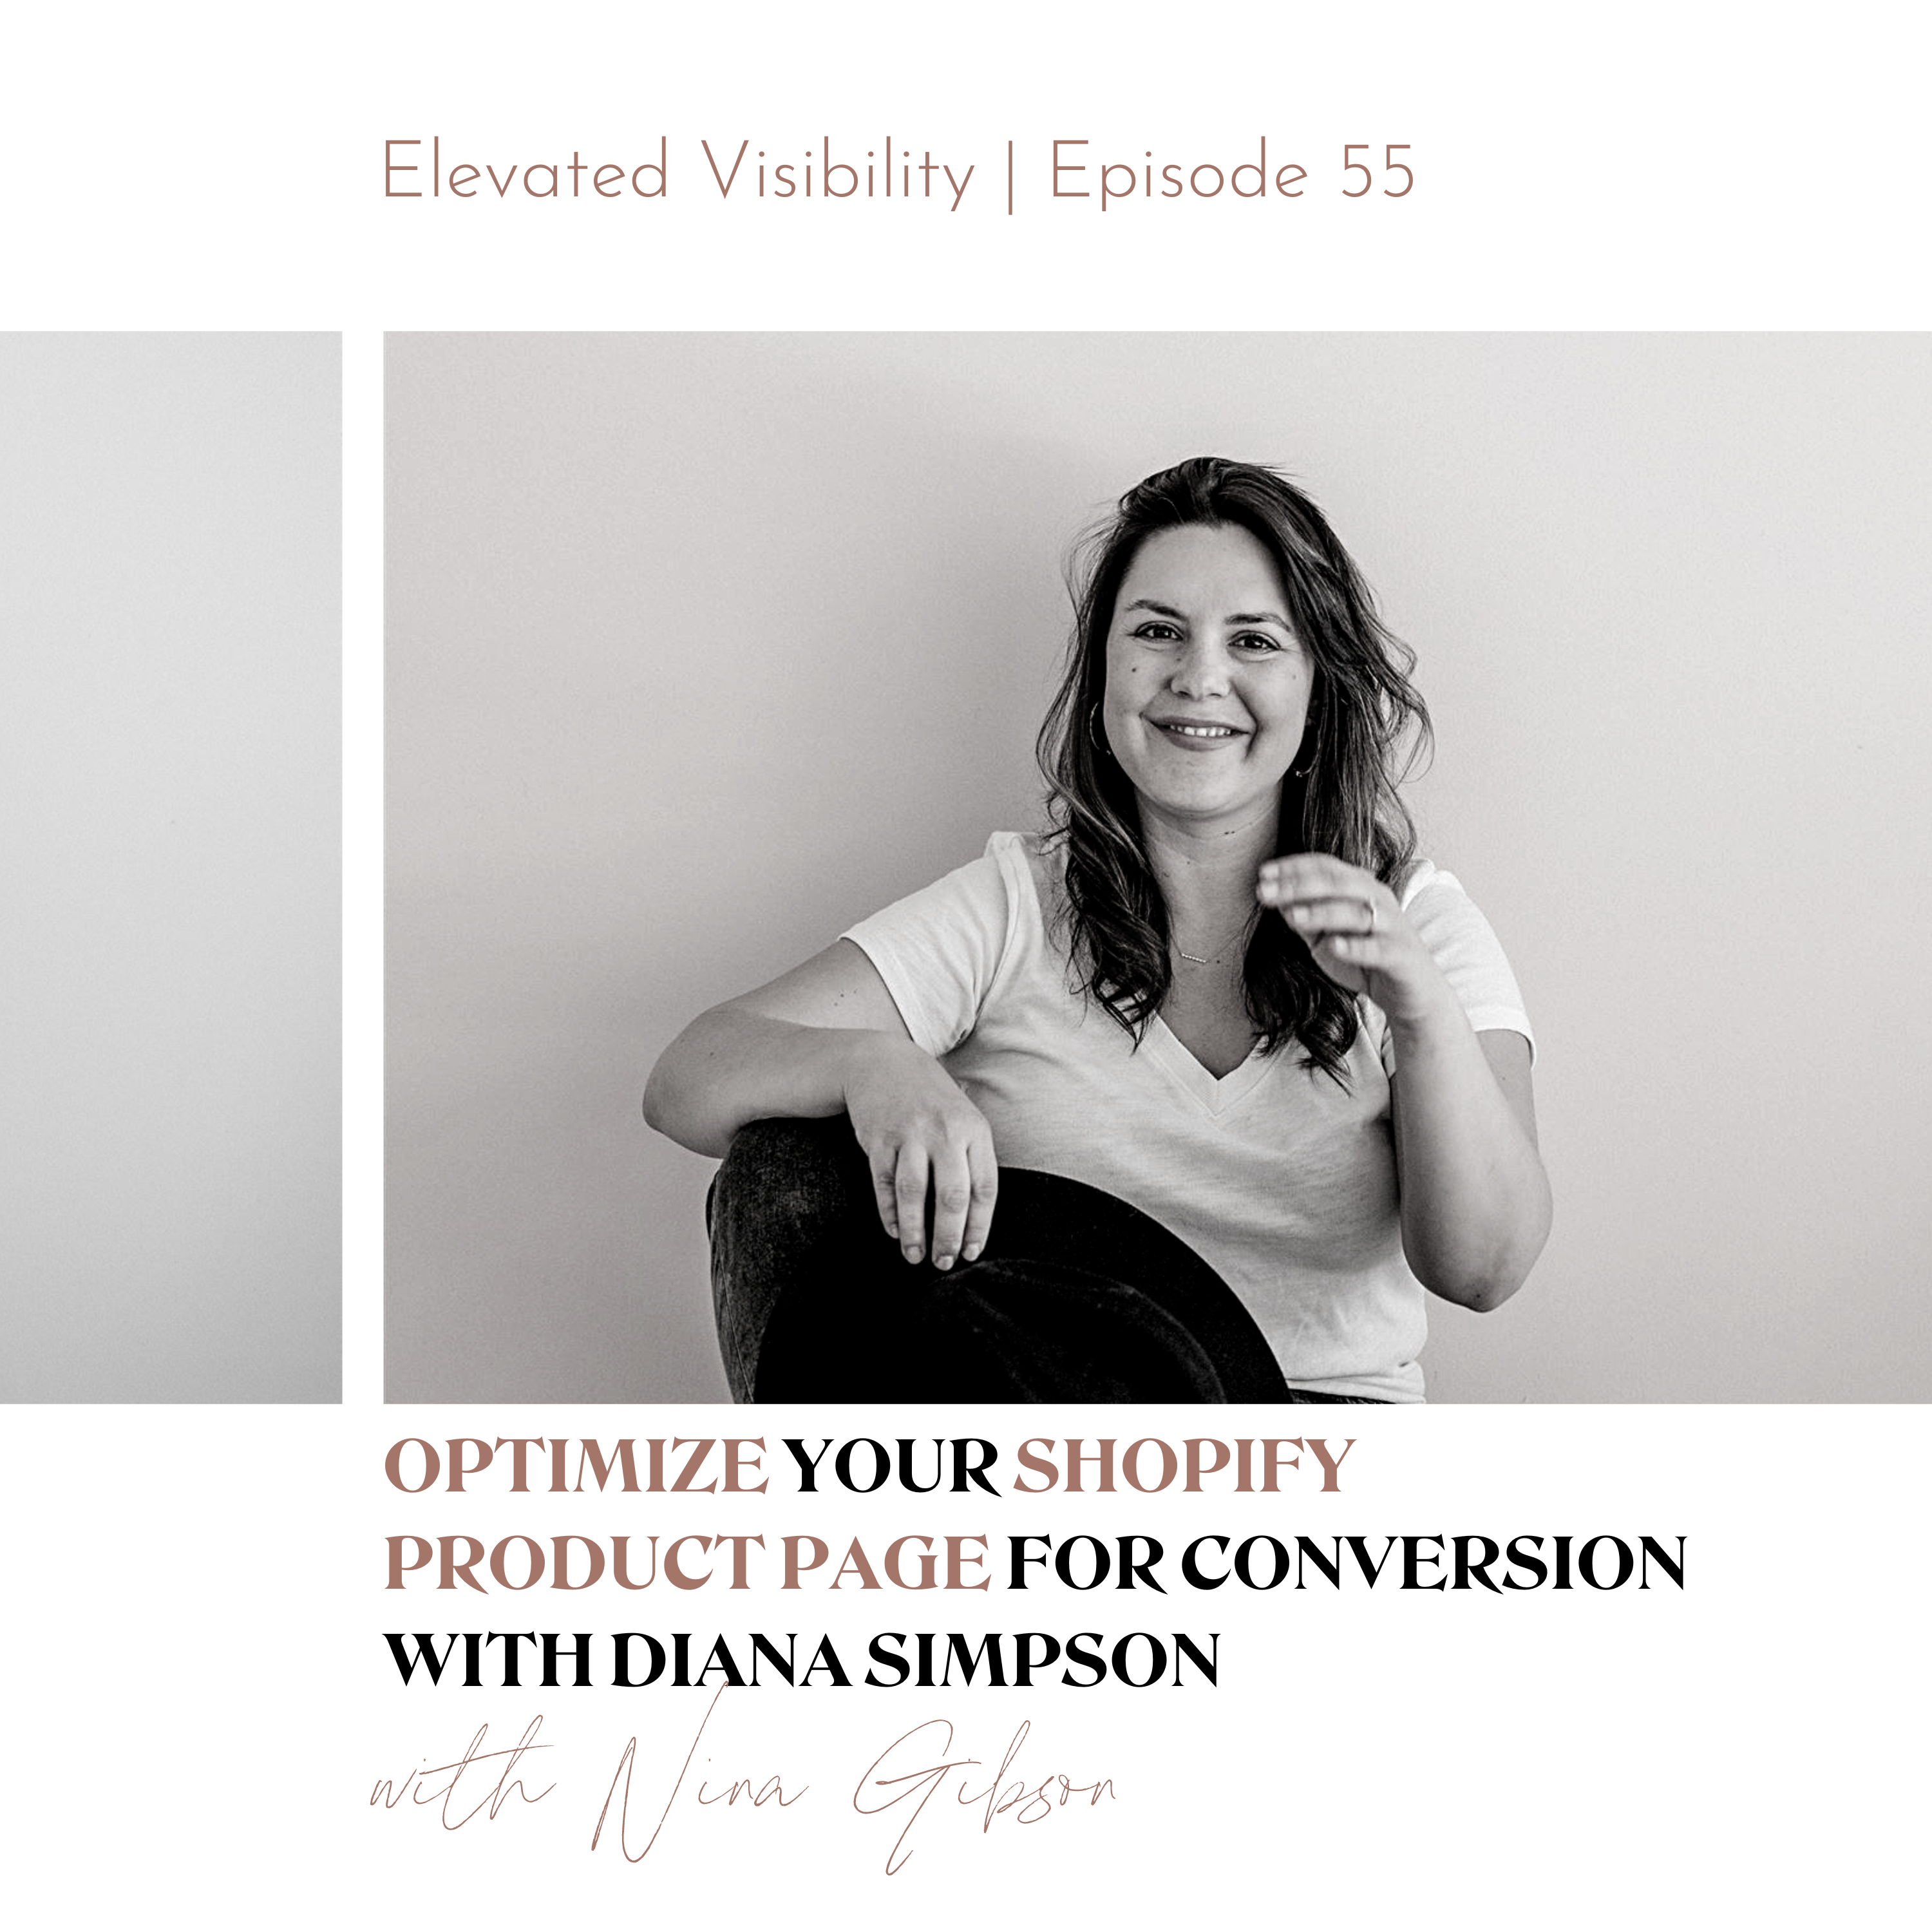 Elevated Visbility podcast episode 55: Optimize Your Shopify Product Page For Conversion with Diana Simpson - featured image